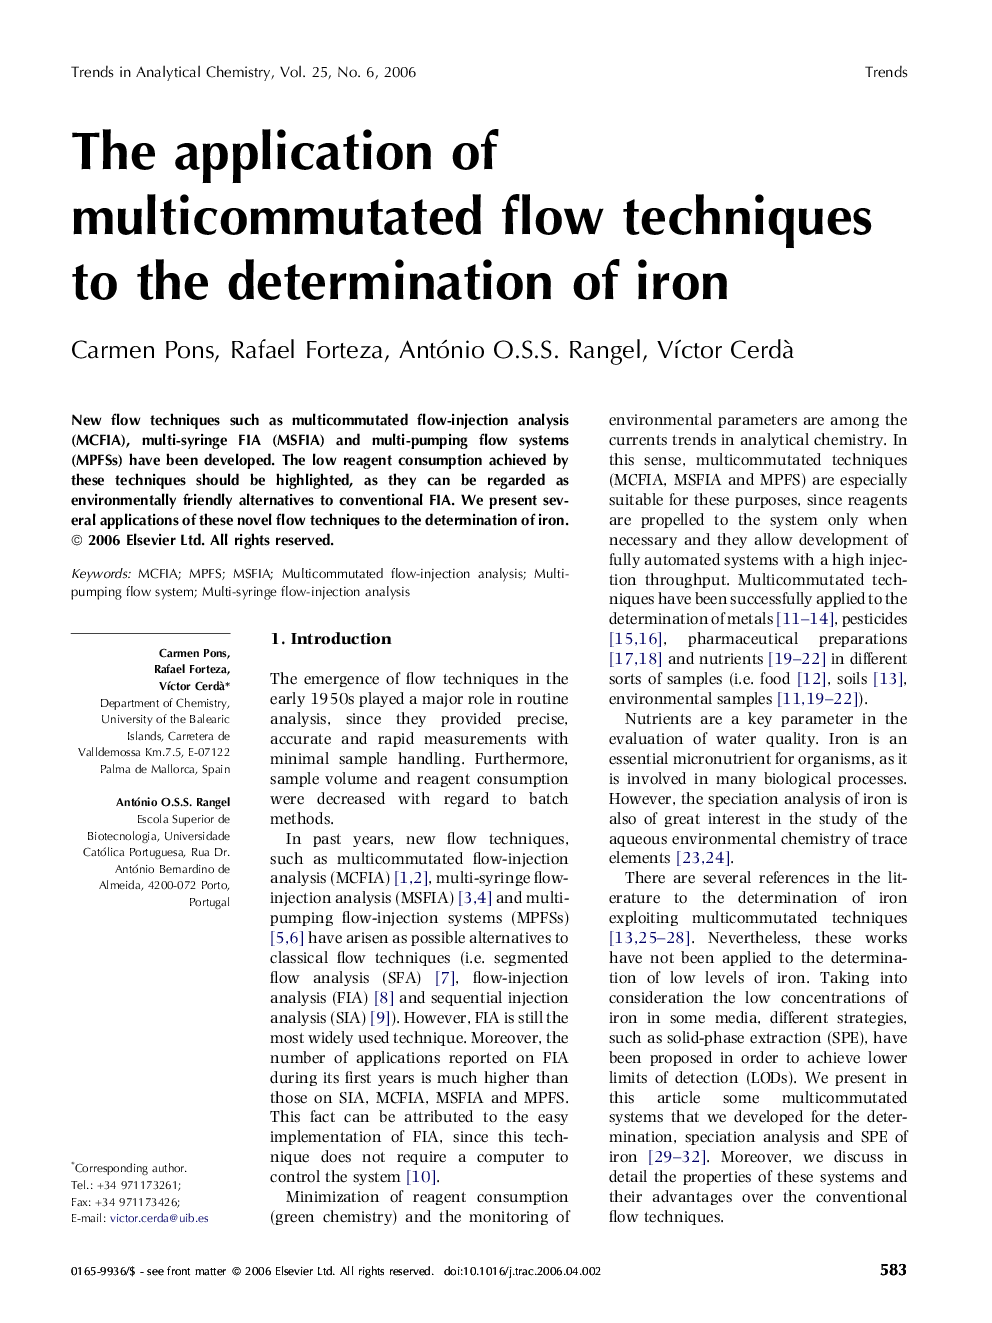 The application of multicommutated flow techniques to the determination of iron